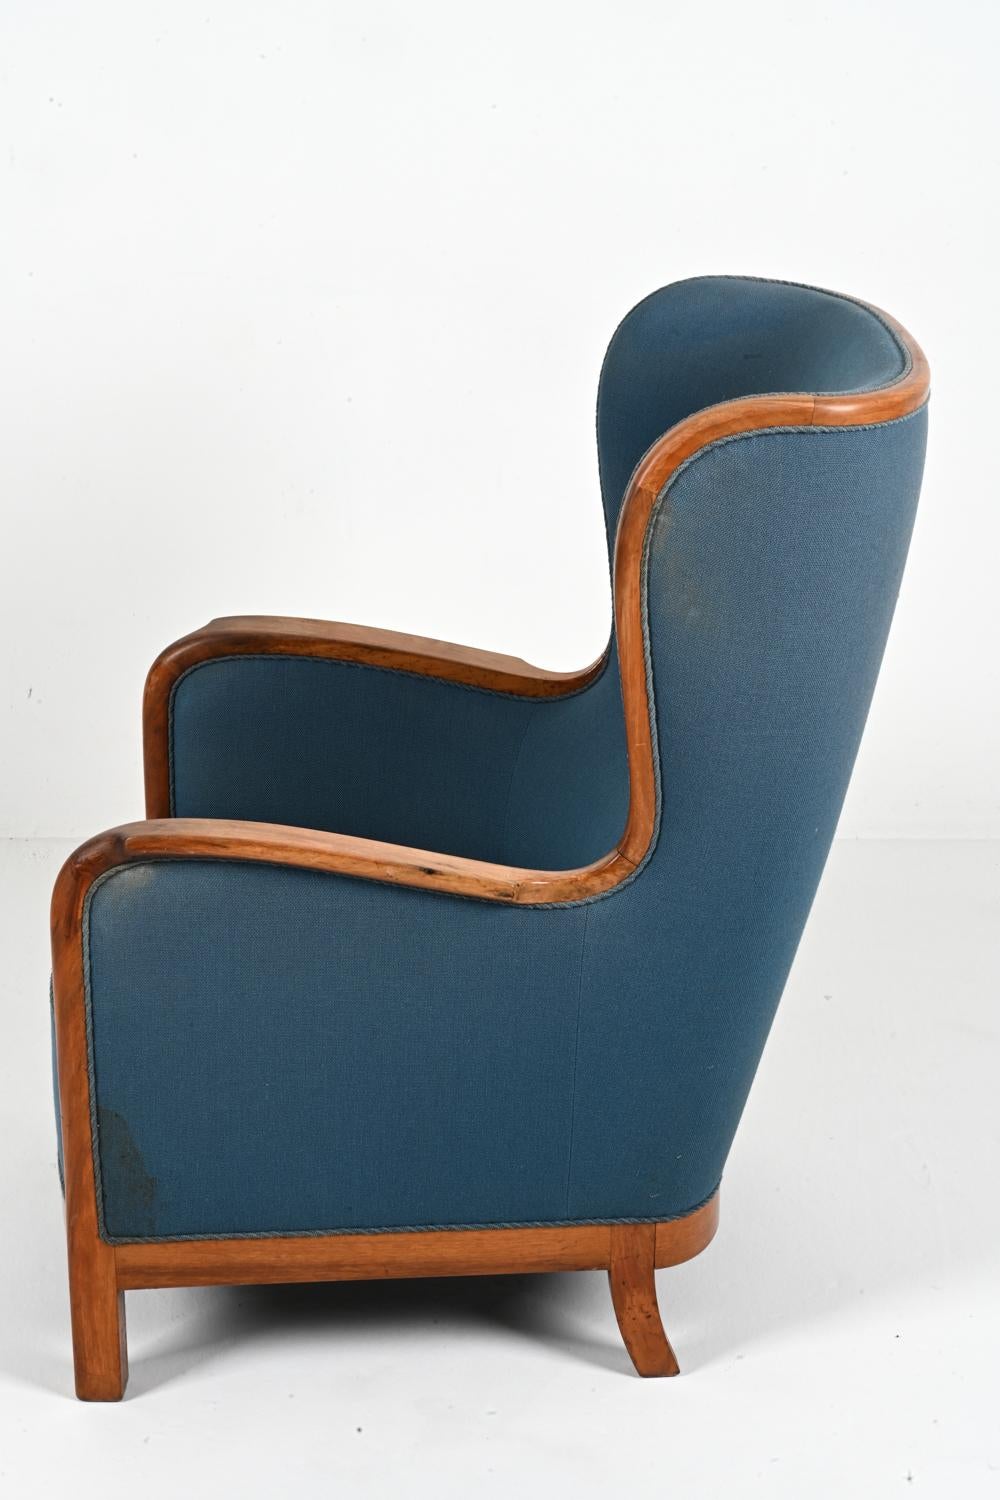 Danish Mahogany Wingback Easy Chair by Frits Henningsen, c. 1940's For Sale 1